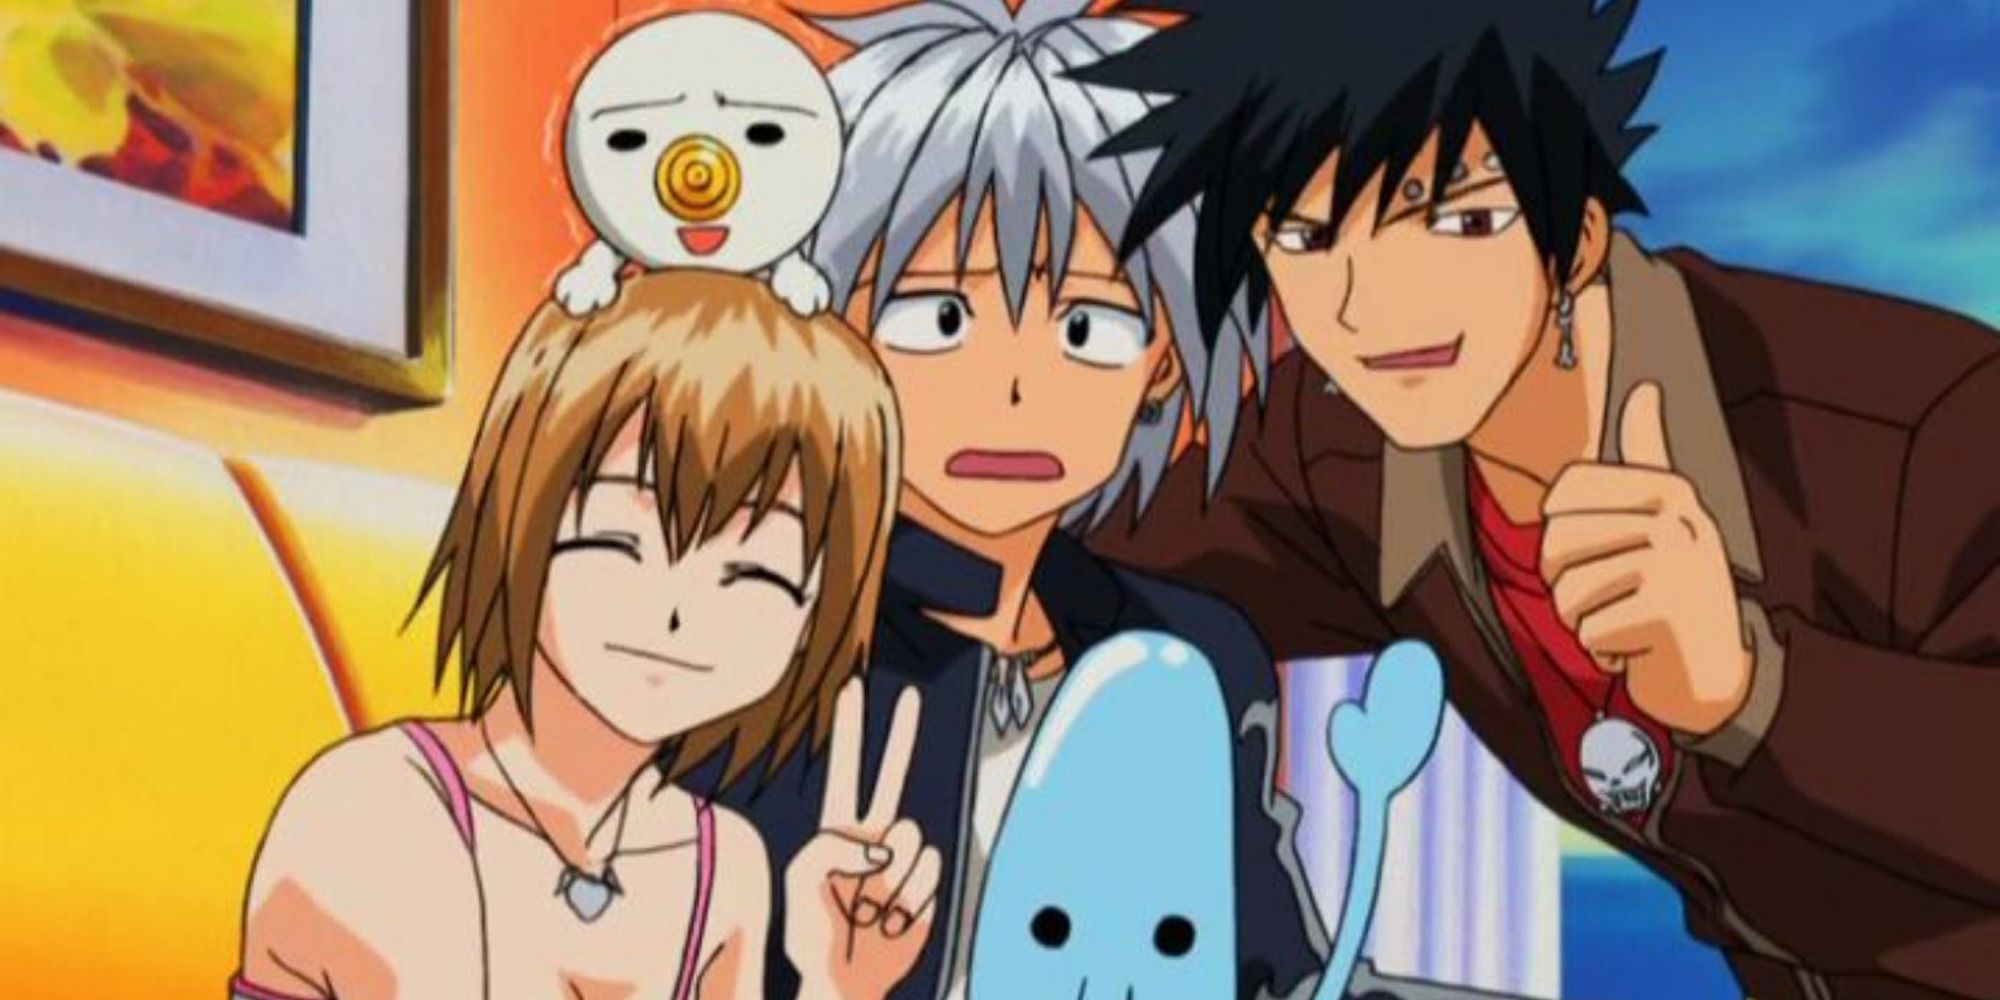 A scene featuring characters from Rave Master